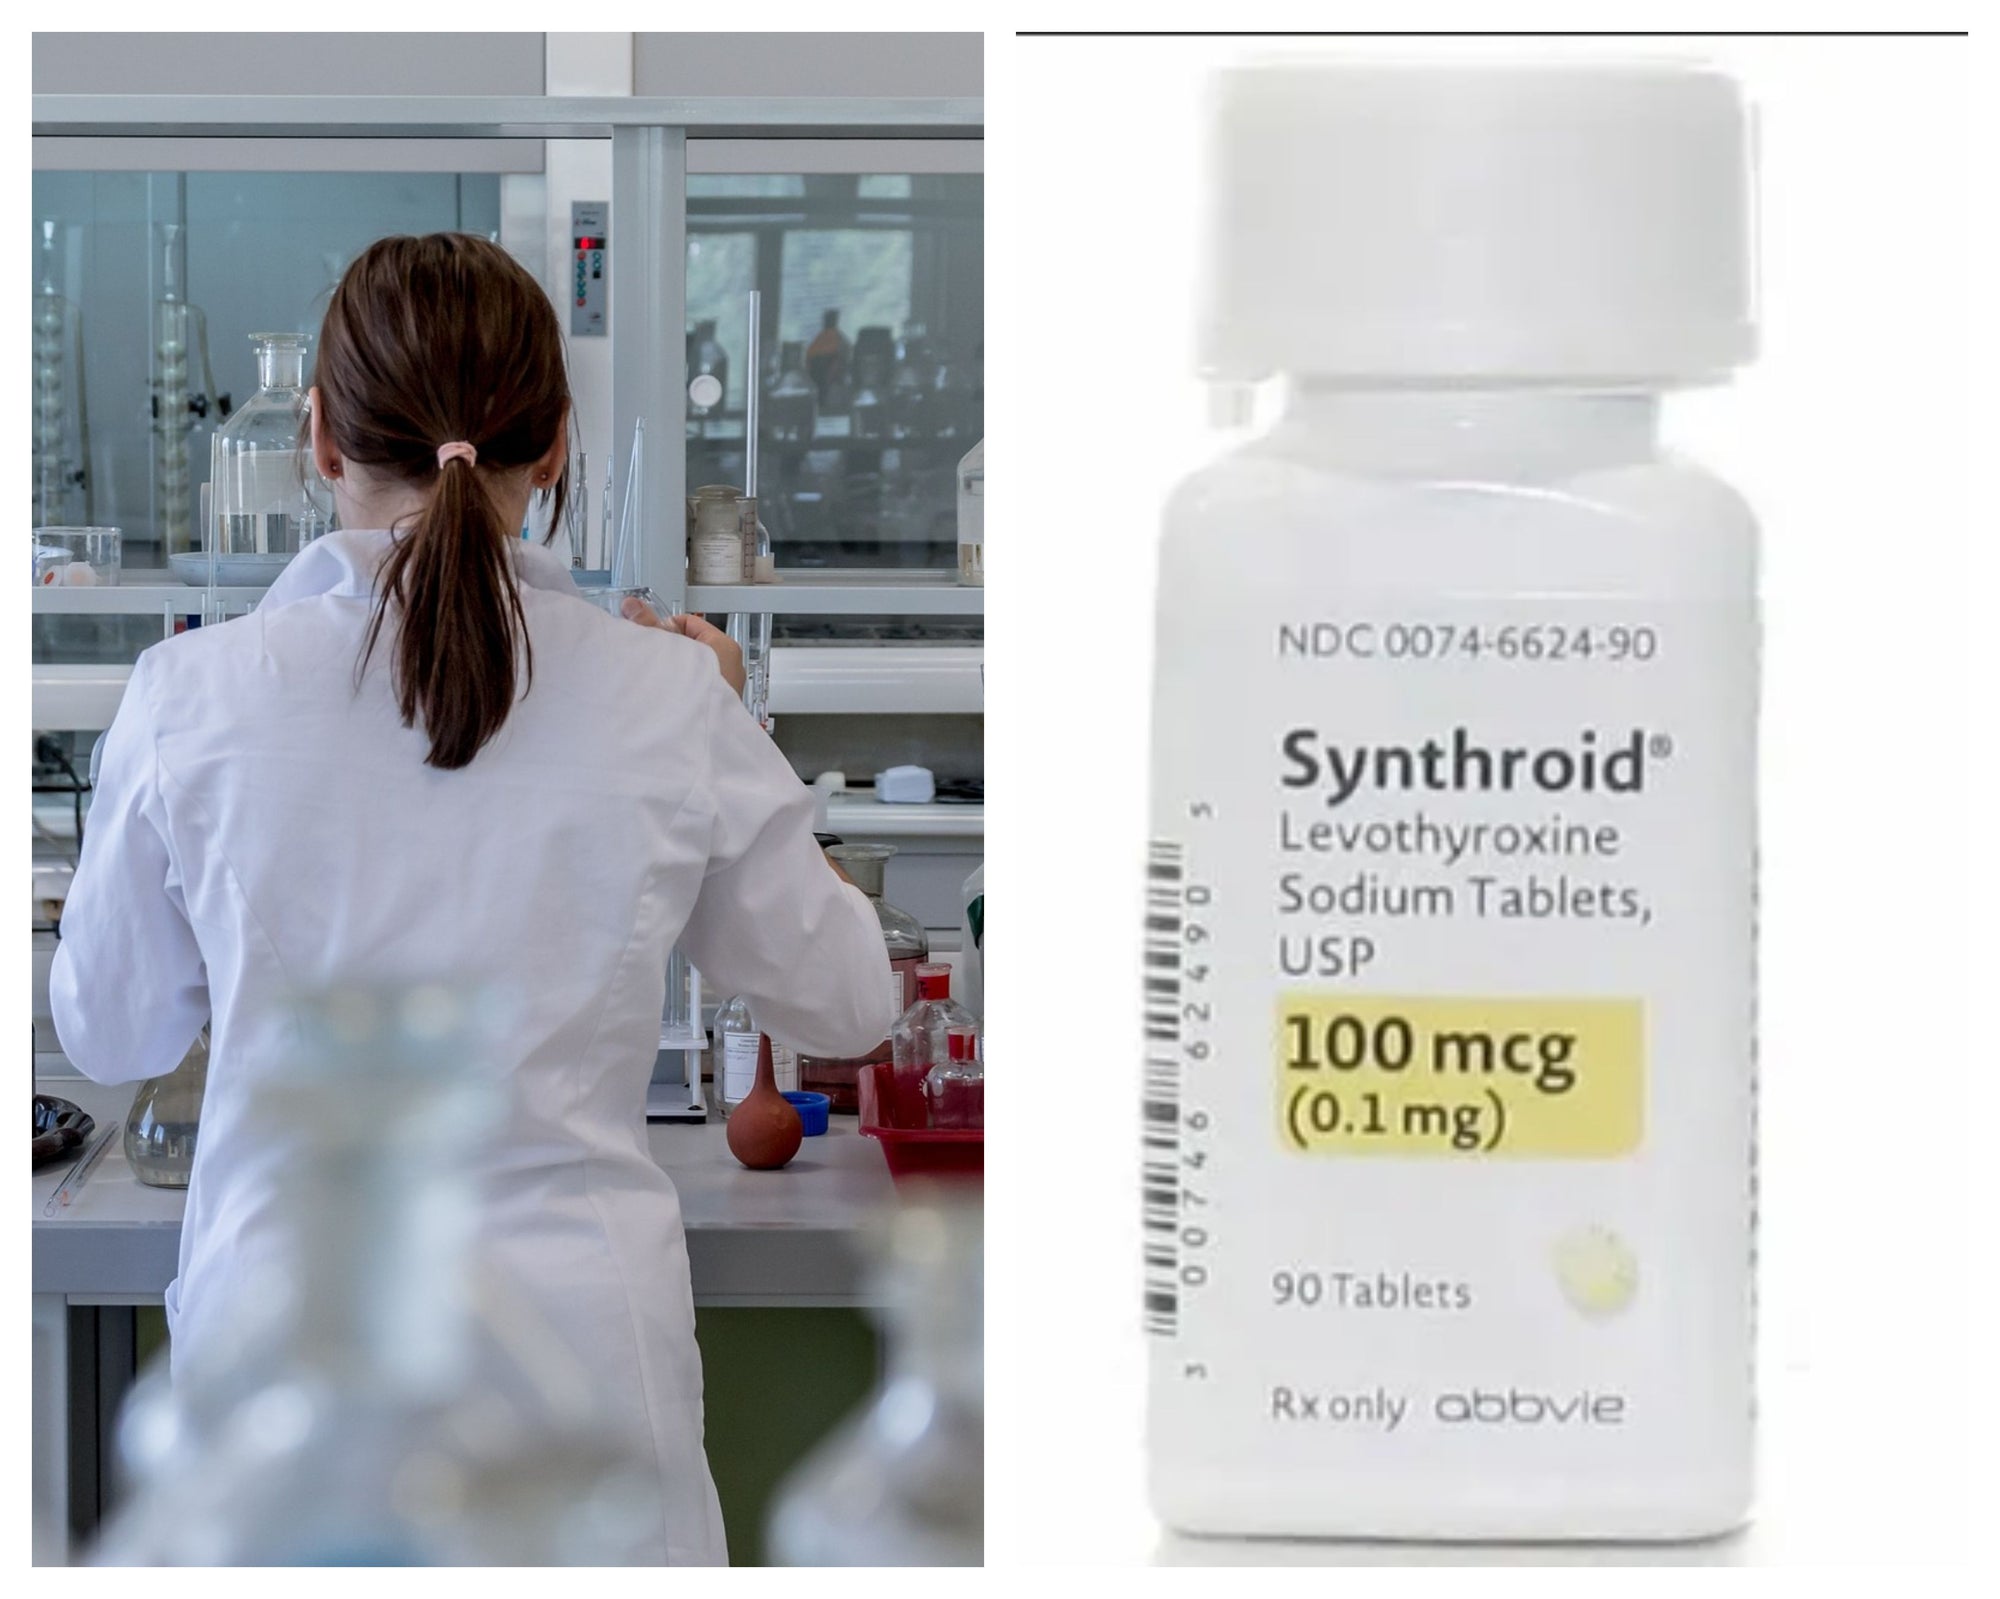 What you need to know about Synthroid: Uses, side effects, dosage, and more